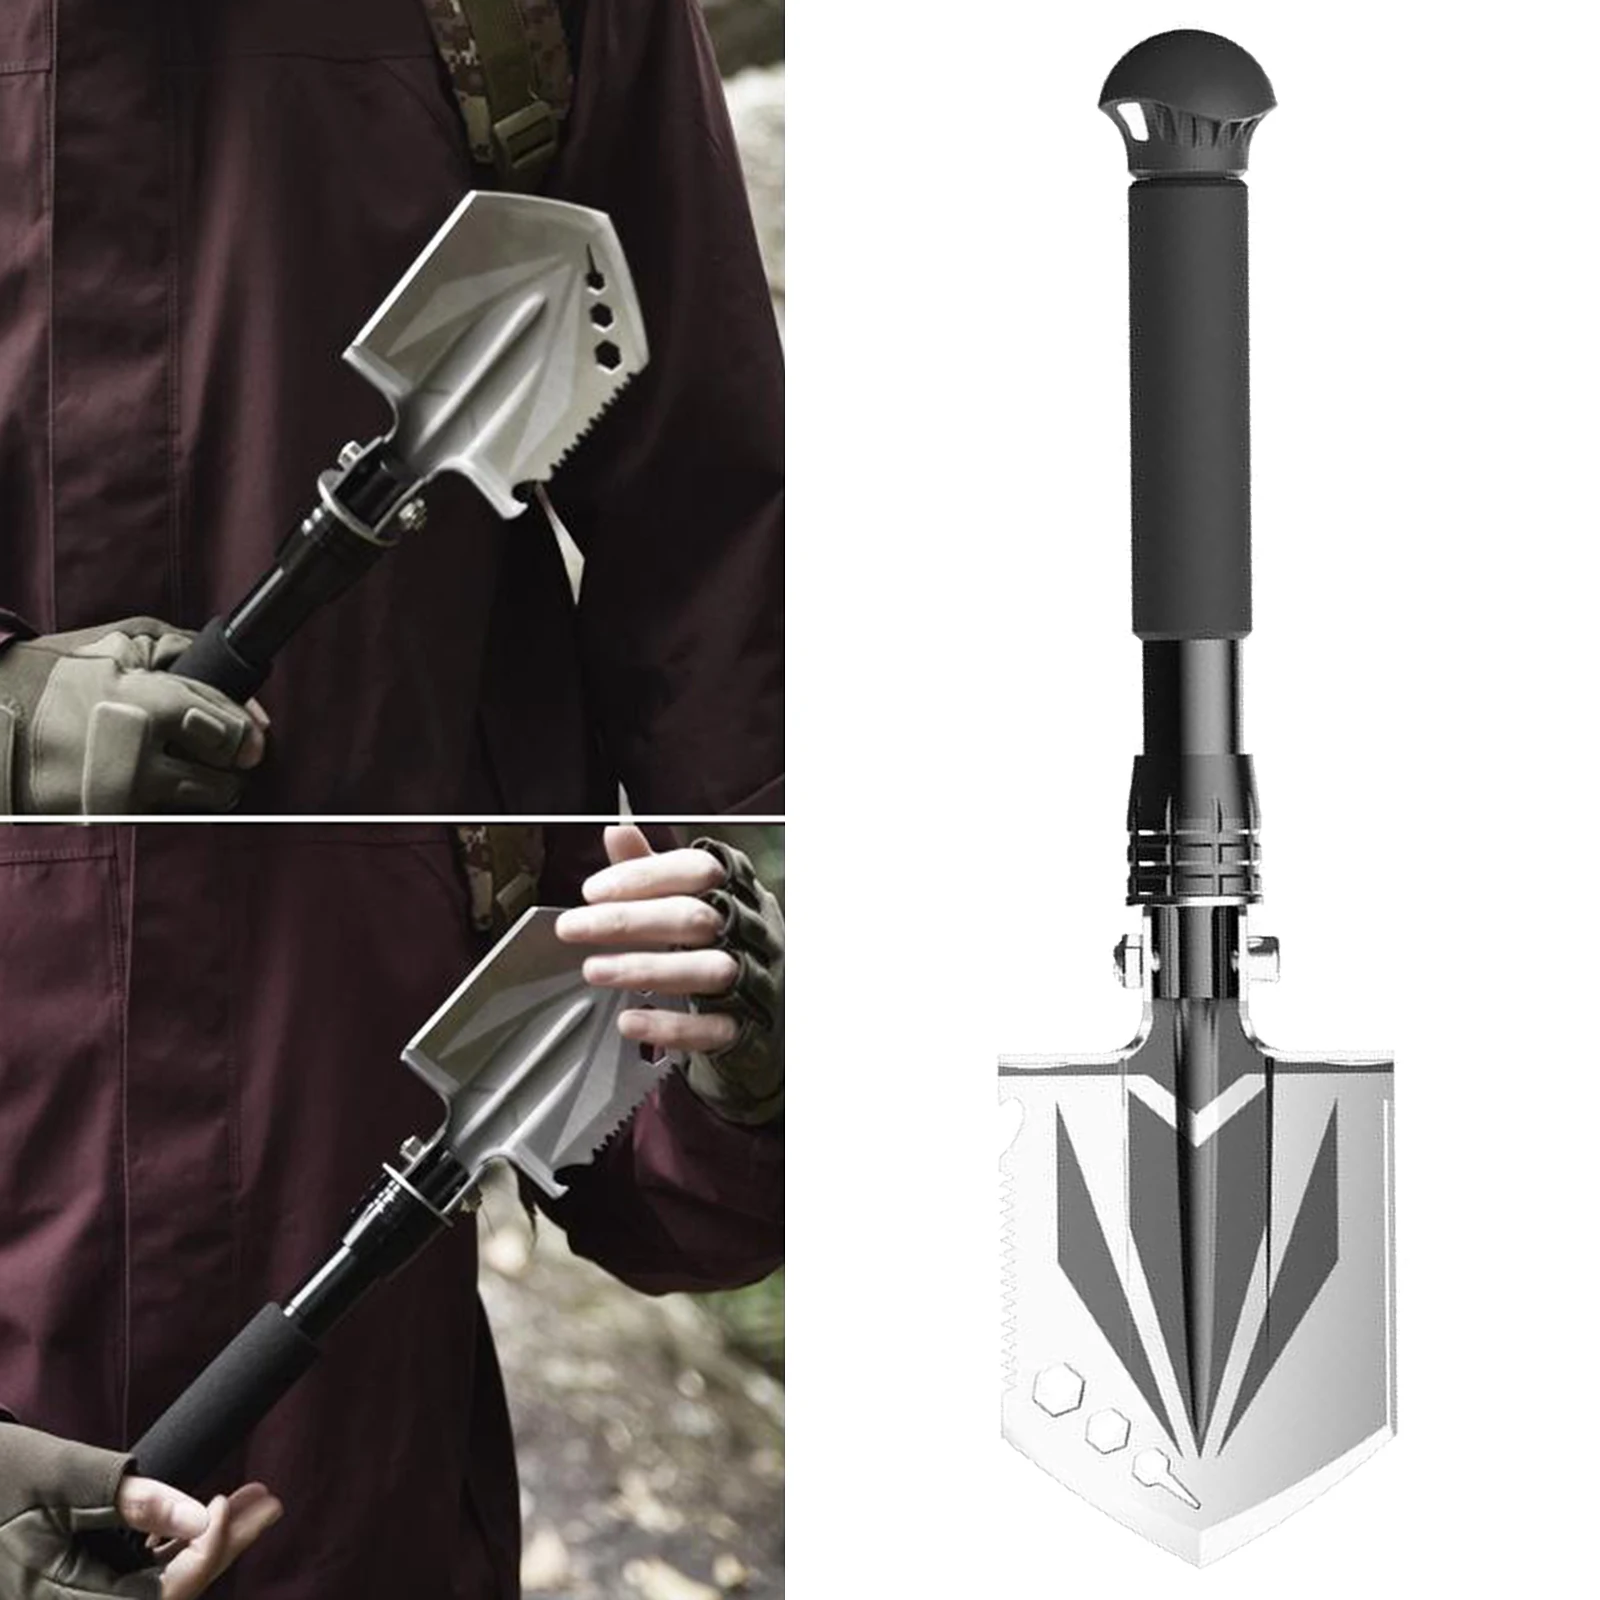 Folding Camping Shovel Survival Axe with Sponge Handle Digging Chipping